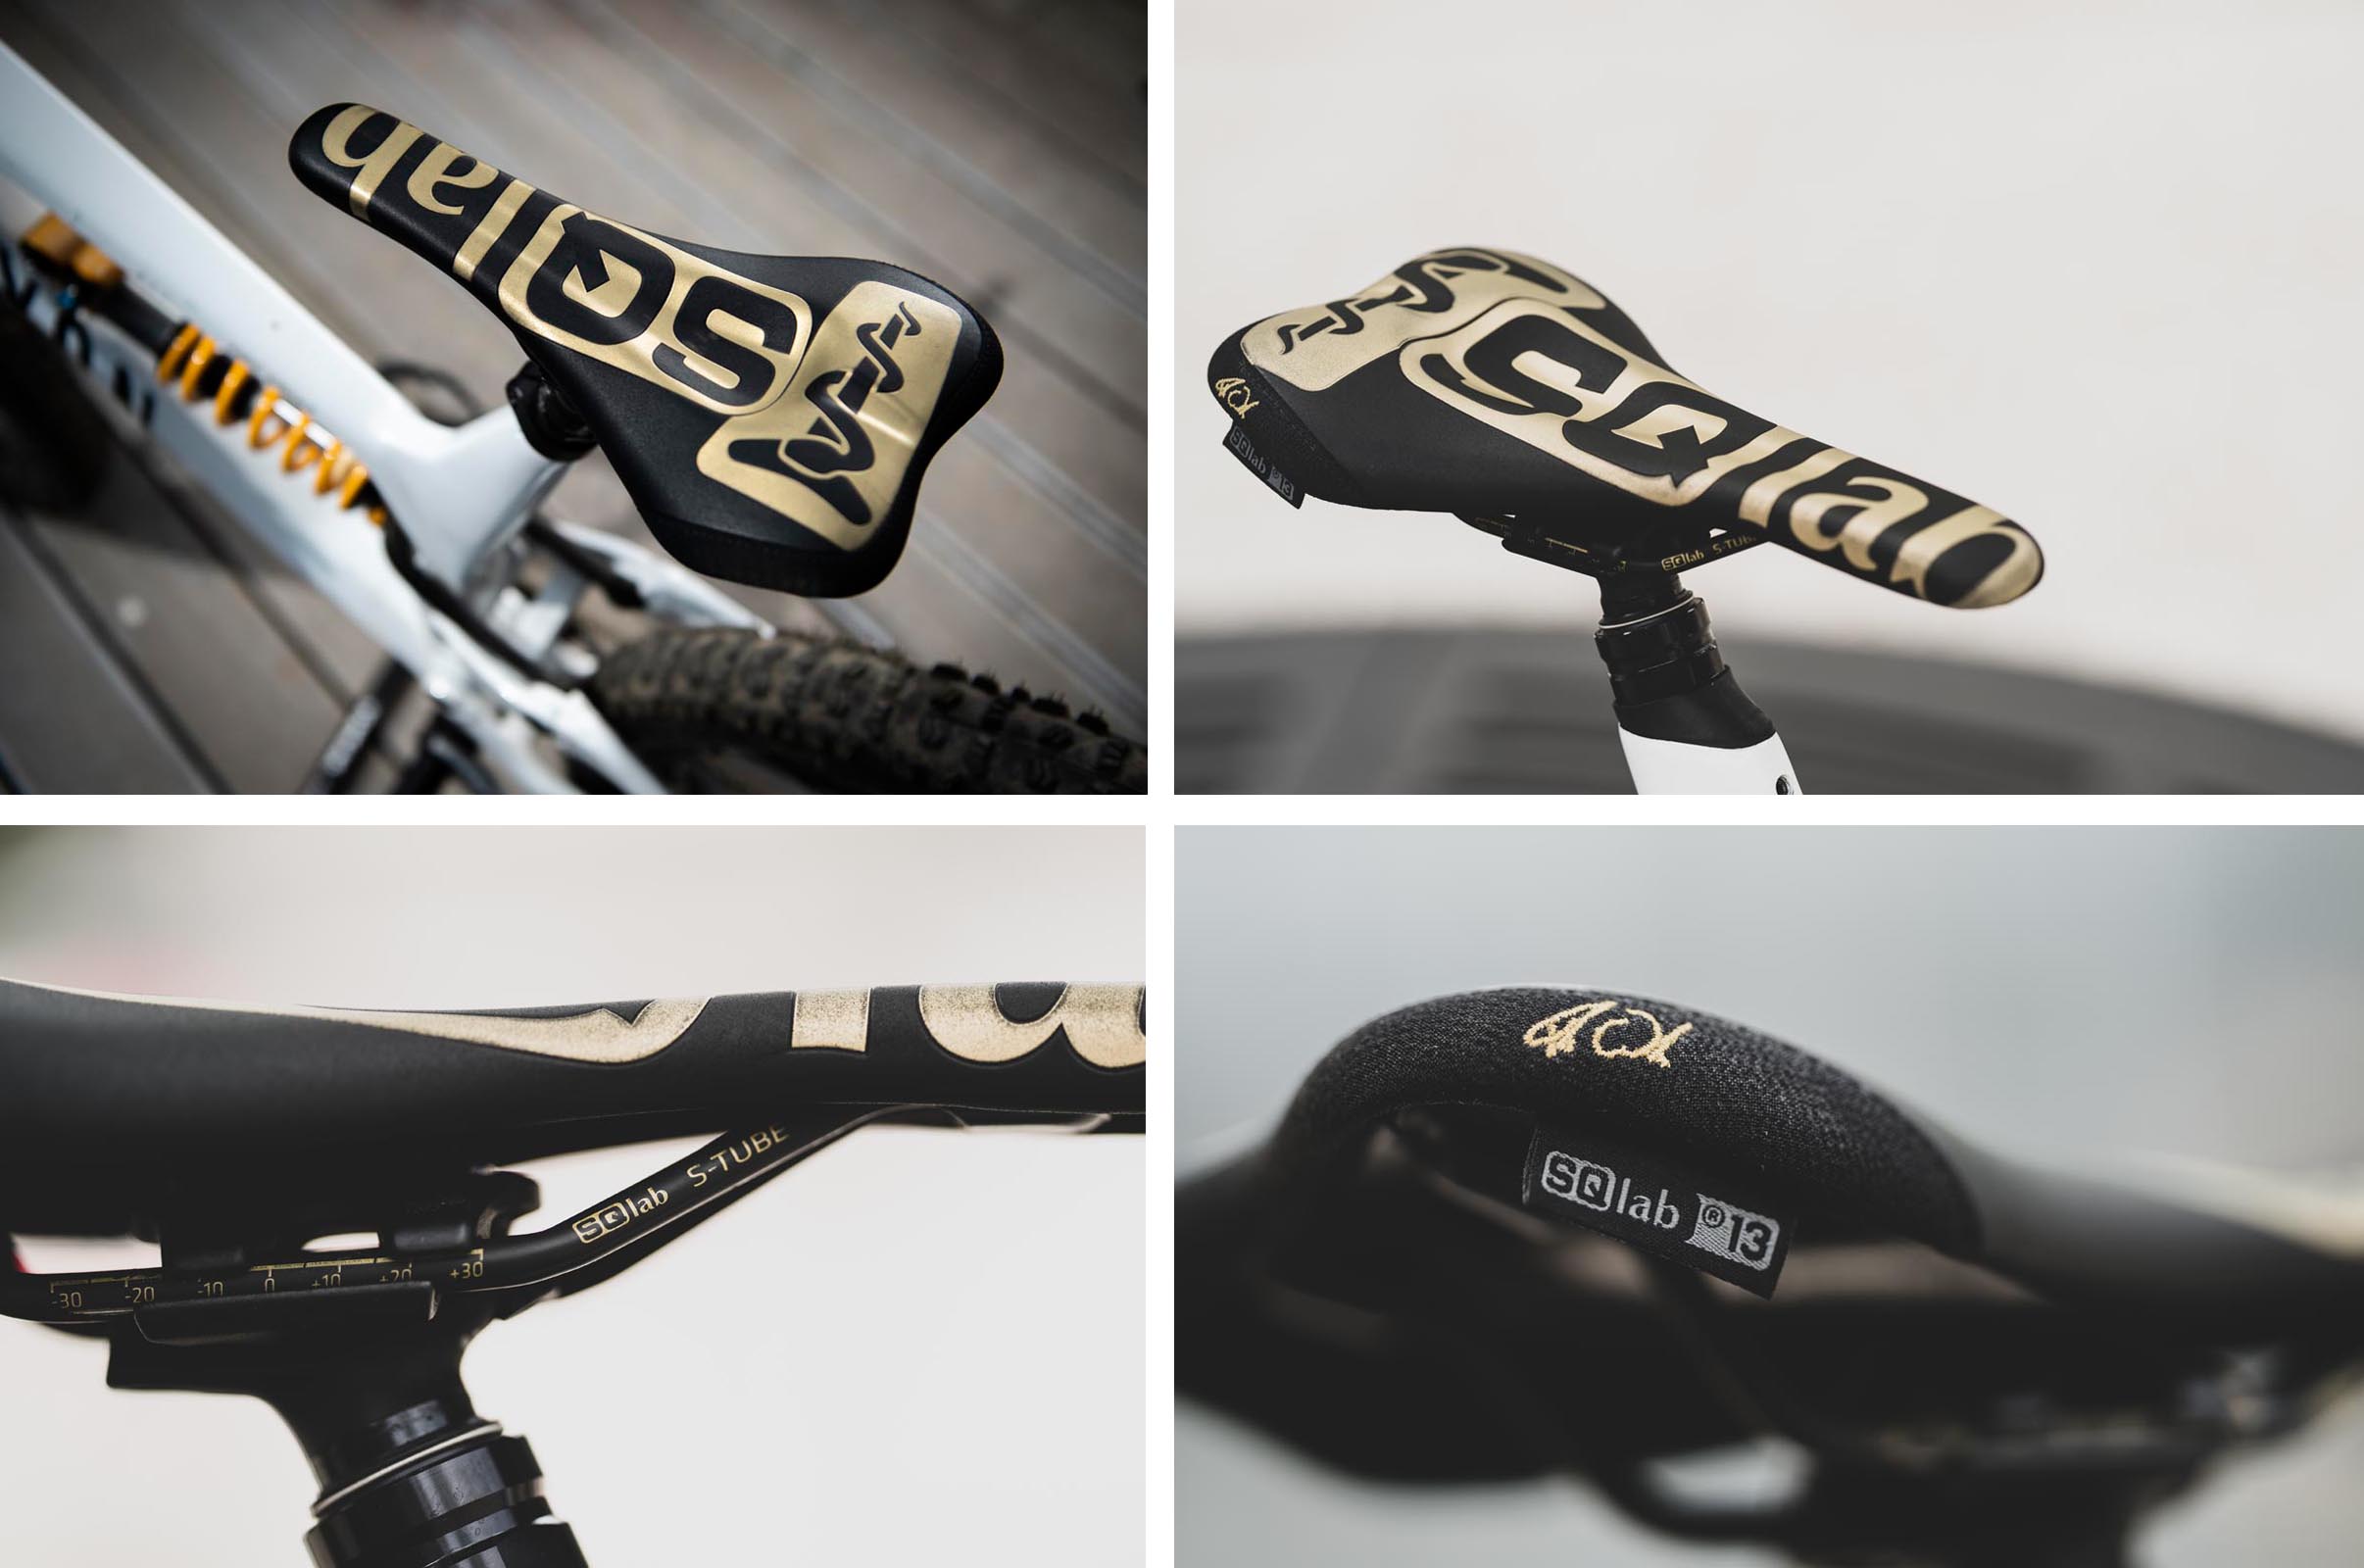 Fabio Wibmer goes for gold with signature edition Magura MT5 brakes, SQLab cockpit